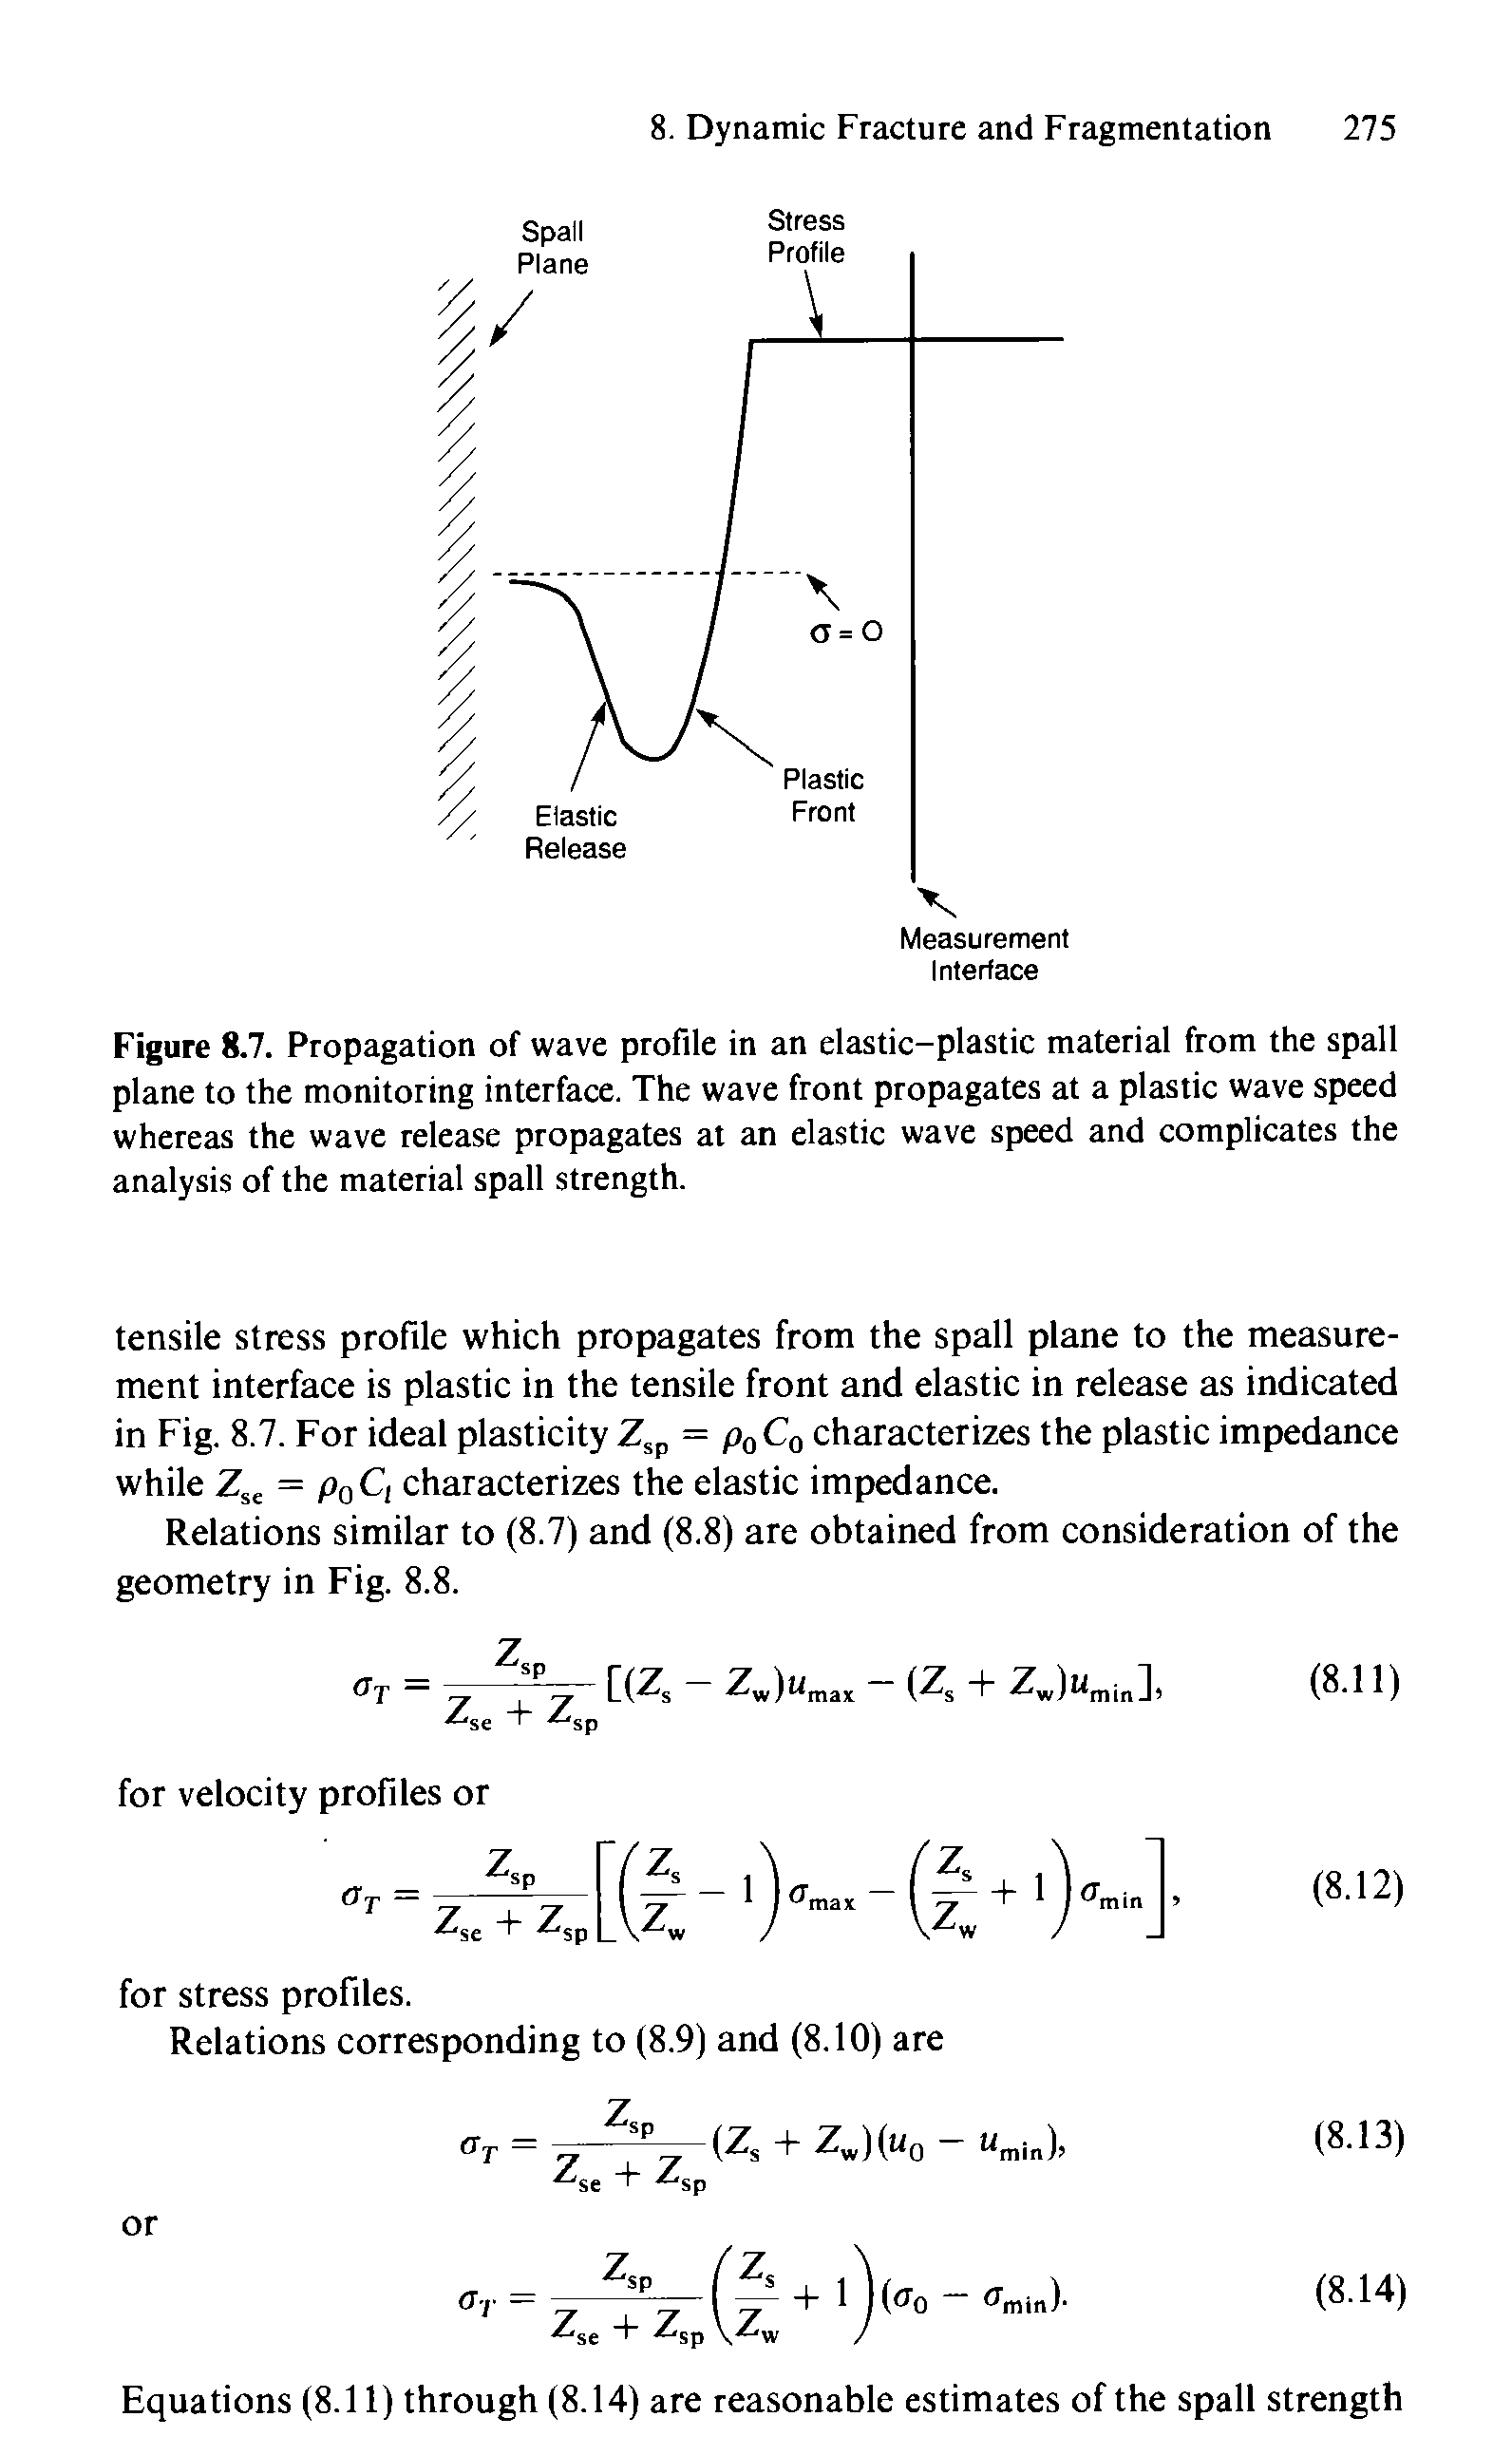 Figure 8.7. Propagation of wave profile in an elastic-plastic material from the spall plane to the monitoring interface. The wave front propagates at a plastic wave speed whereas the wave release propagates at an elastic wave speed and complicates the analysis of the material spall strength.